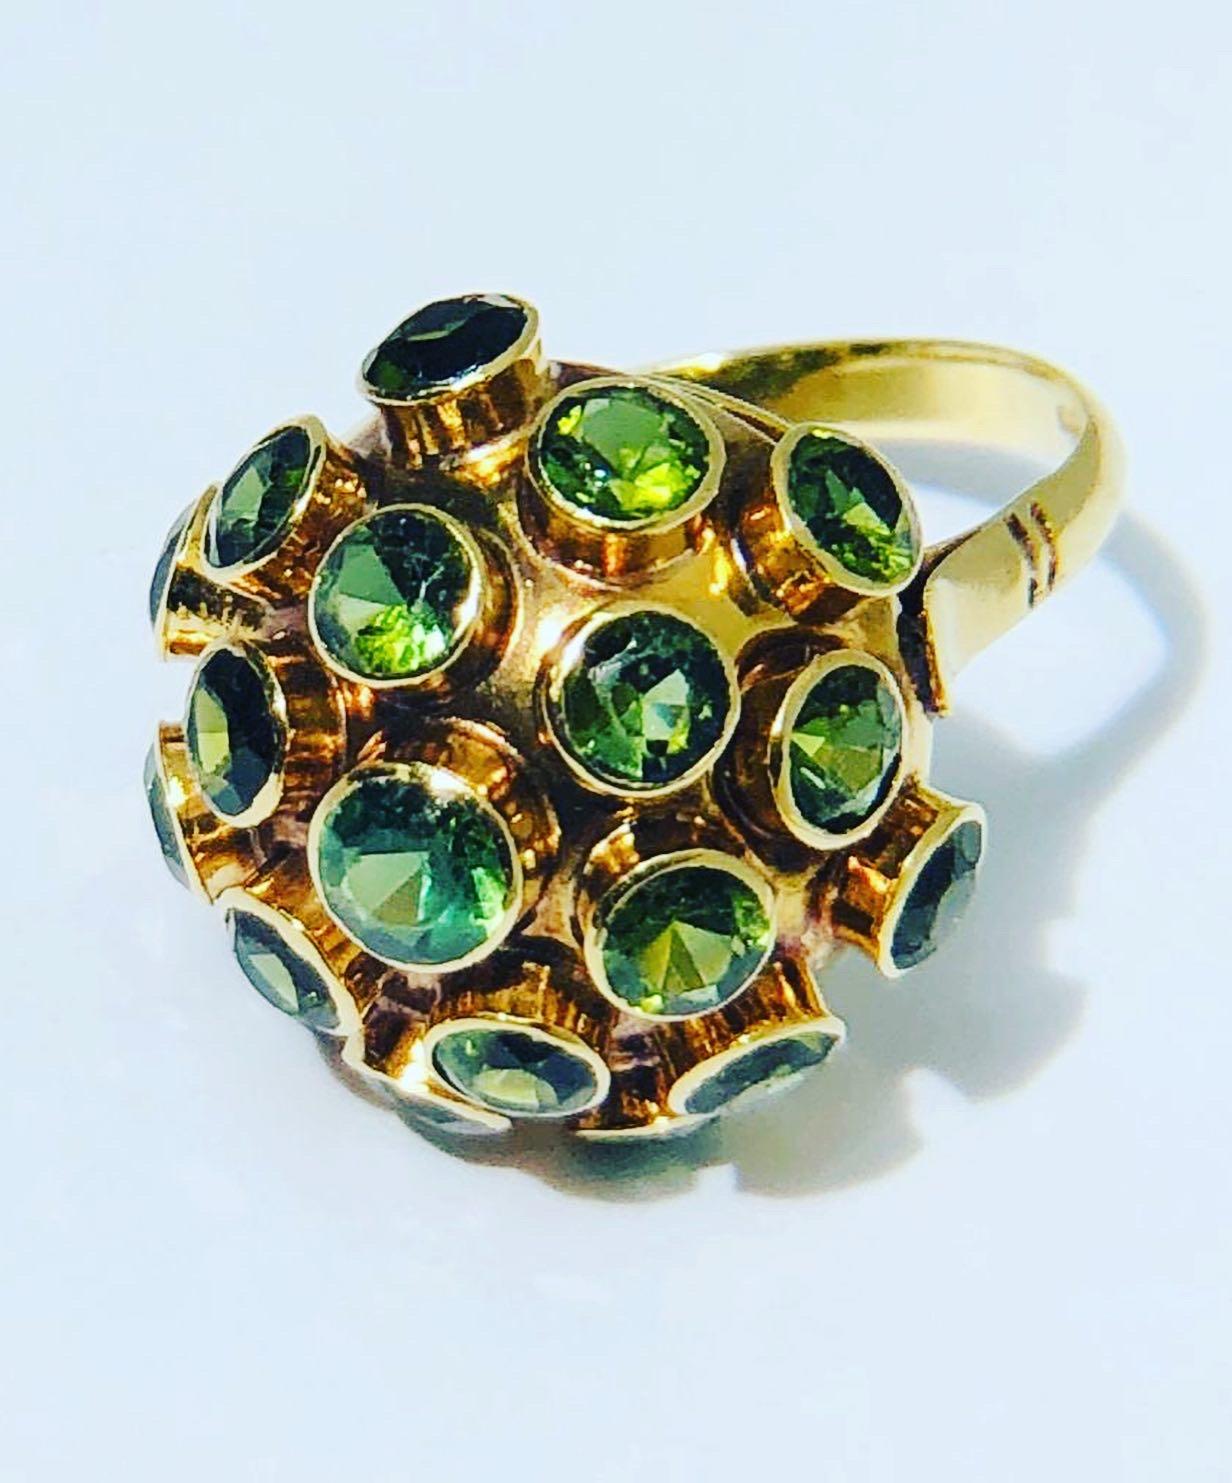 Peridot cocktail ring in the Sputnik style made in England in the 1970’s. Rose gold. Size 6. Band can be sized up or down easily.
Weighs 4 grams 